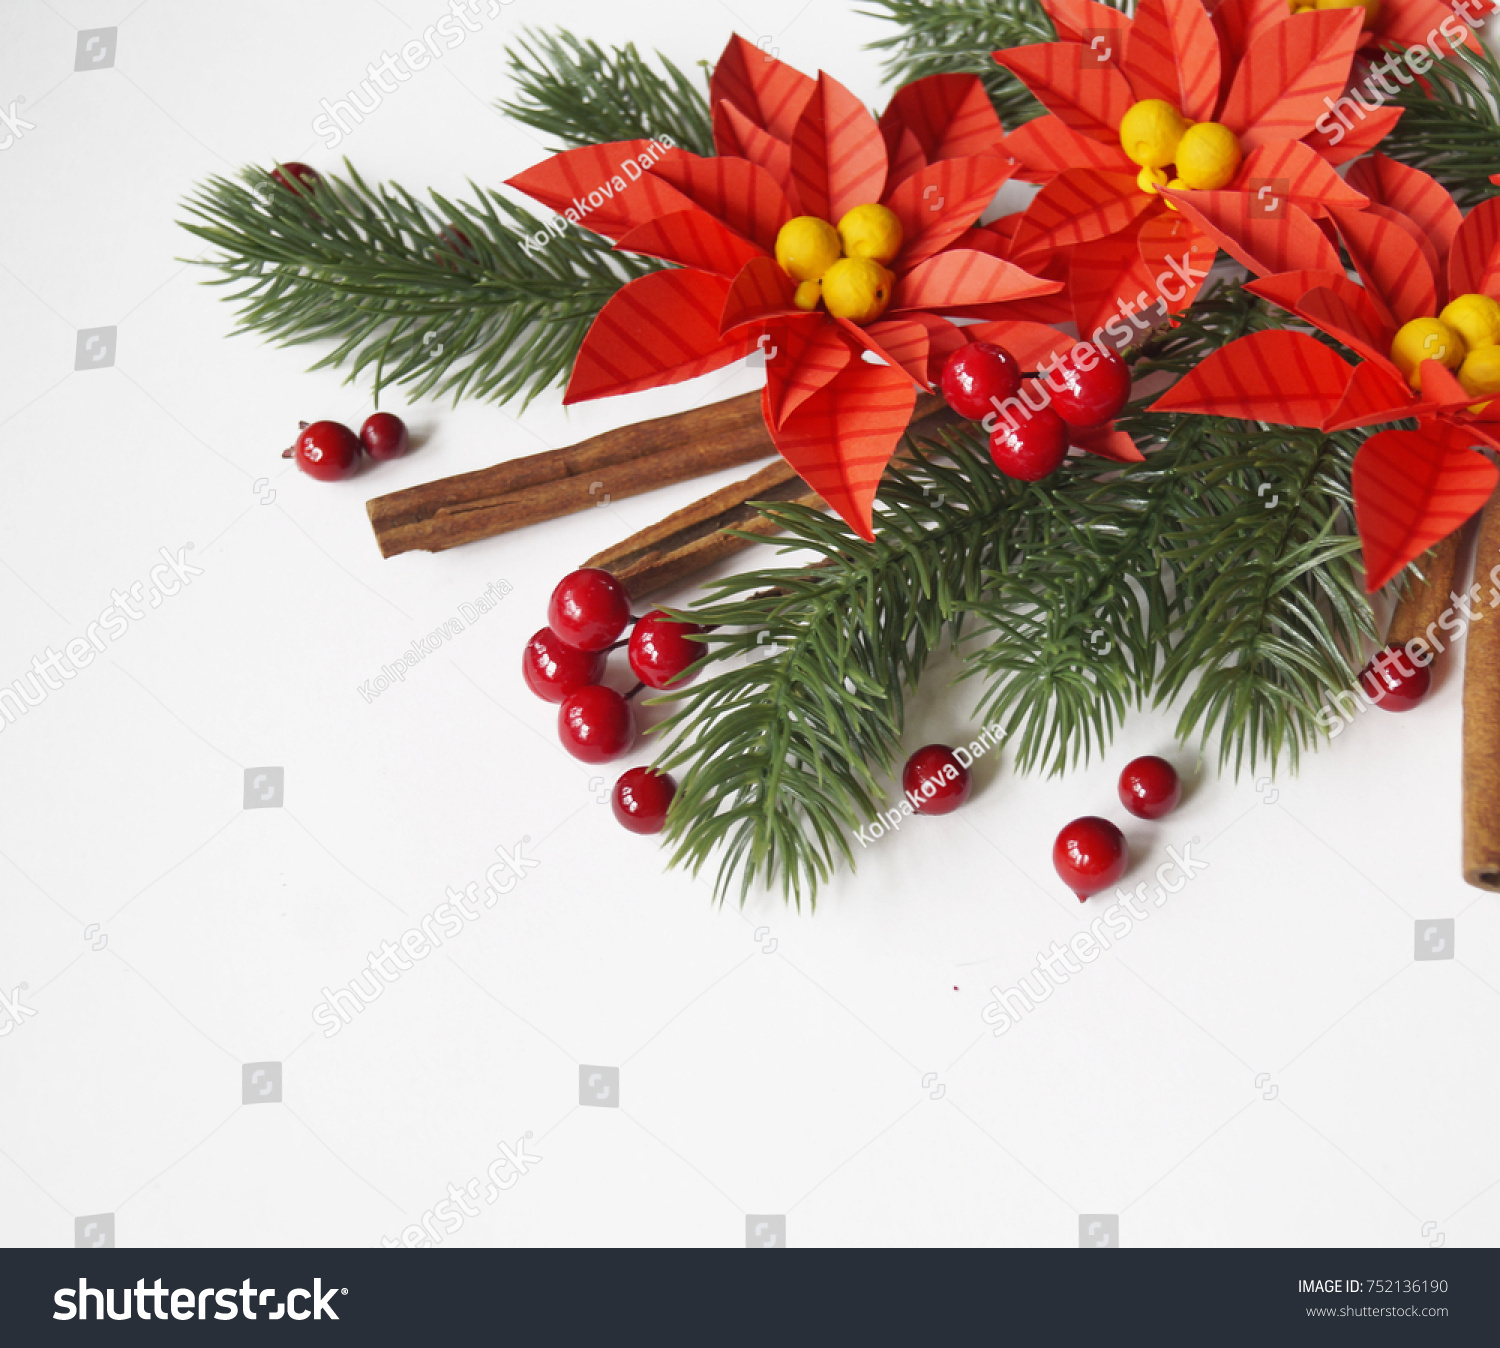 Paper flower poinsettia and spruce branches. Christmas composition. White background. Colors are green, red, yellow. #752136190